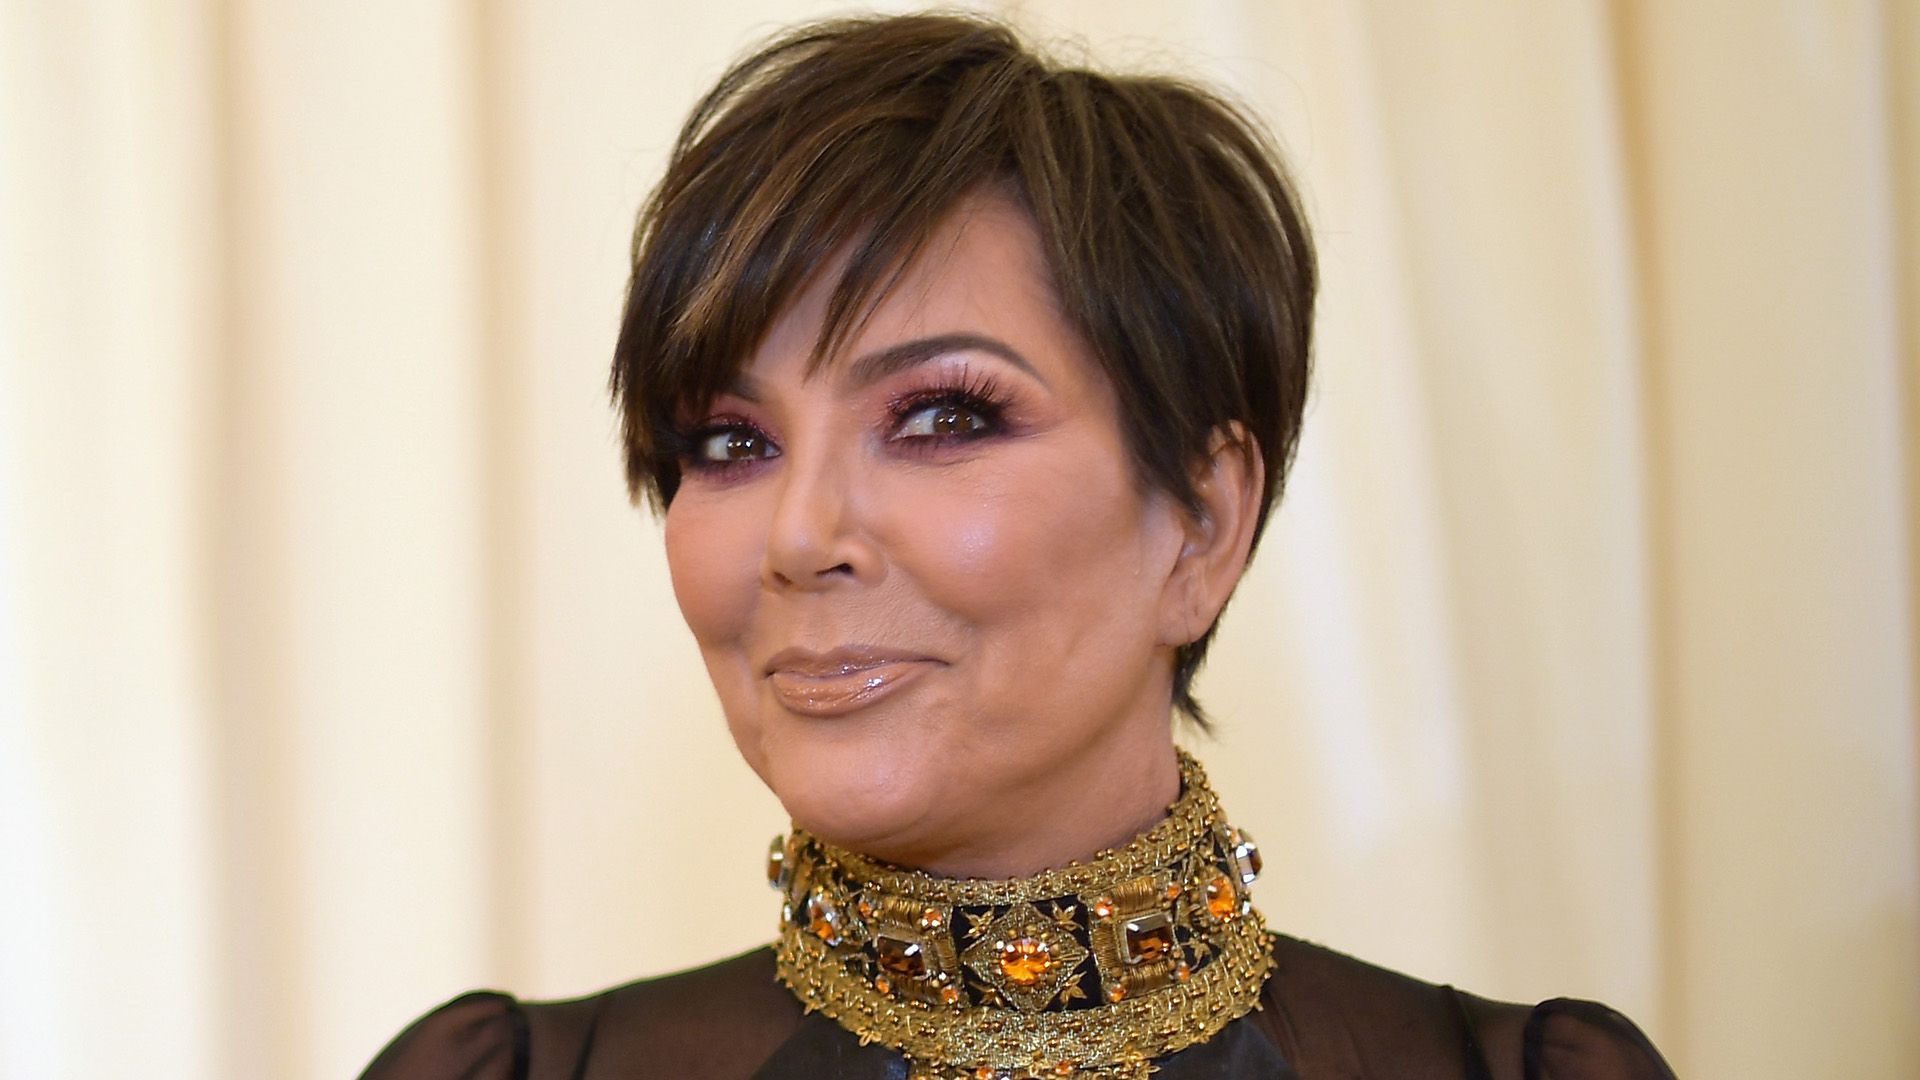 Kris Jenner Accused of Photohop in Pic of One Leg